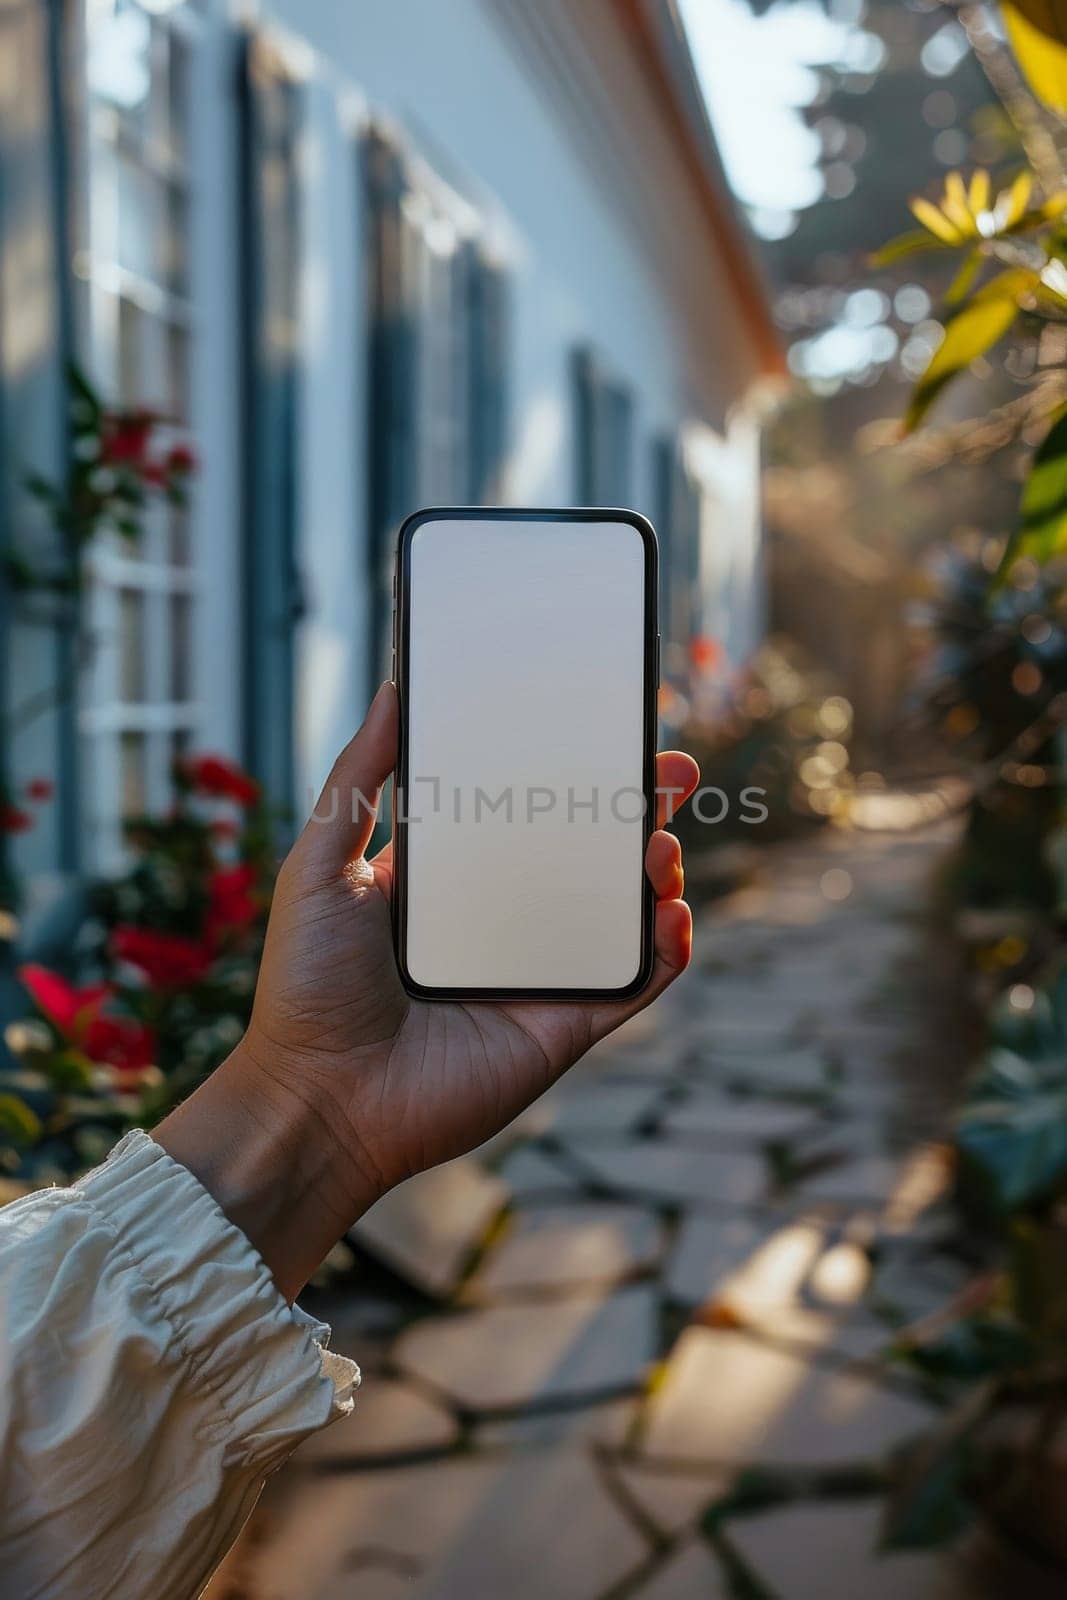 A person holding a phone with a white screen. The phone is in a hand and the person is standing in front of a house